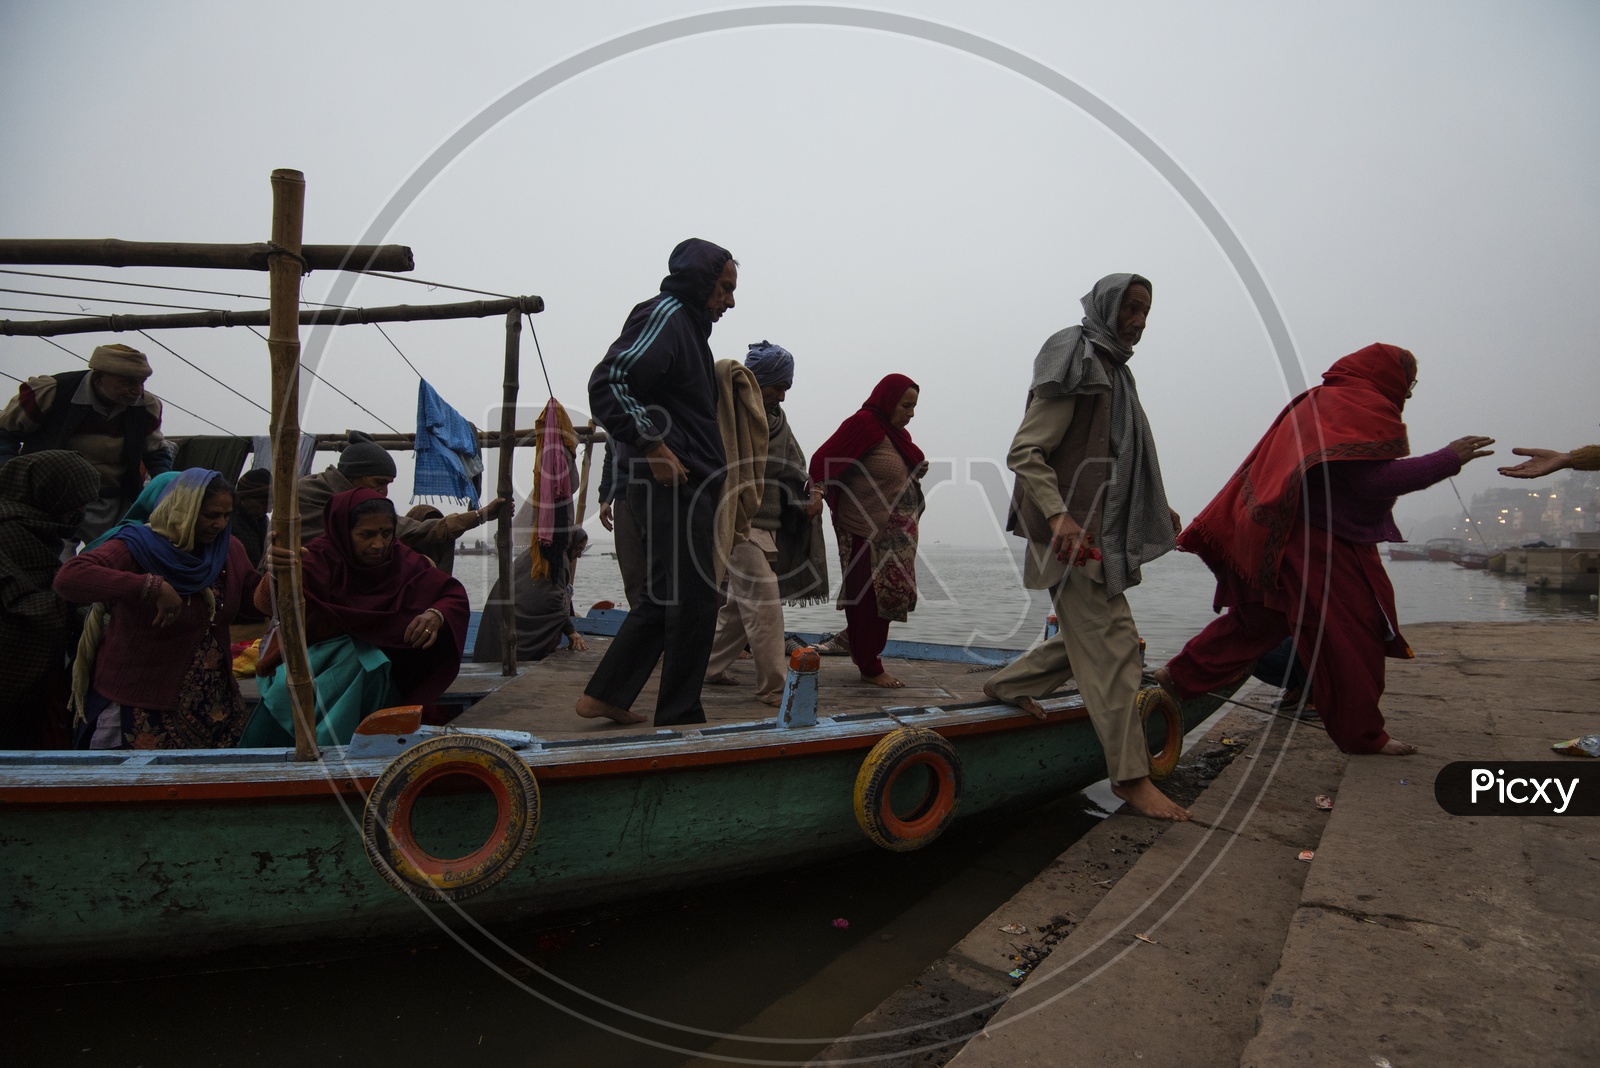 Devotees getting down from a Boat in Varanasi